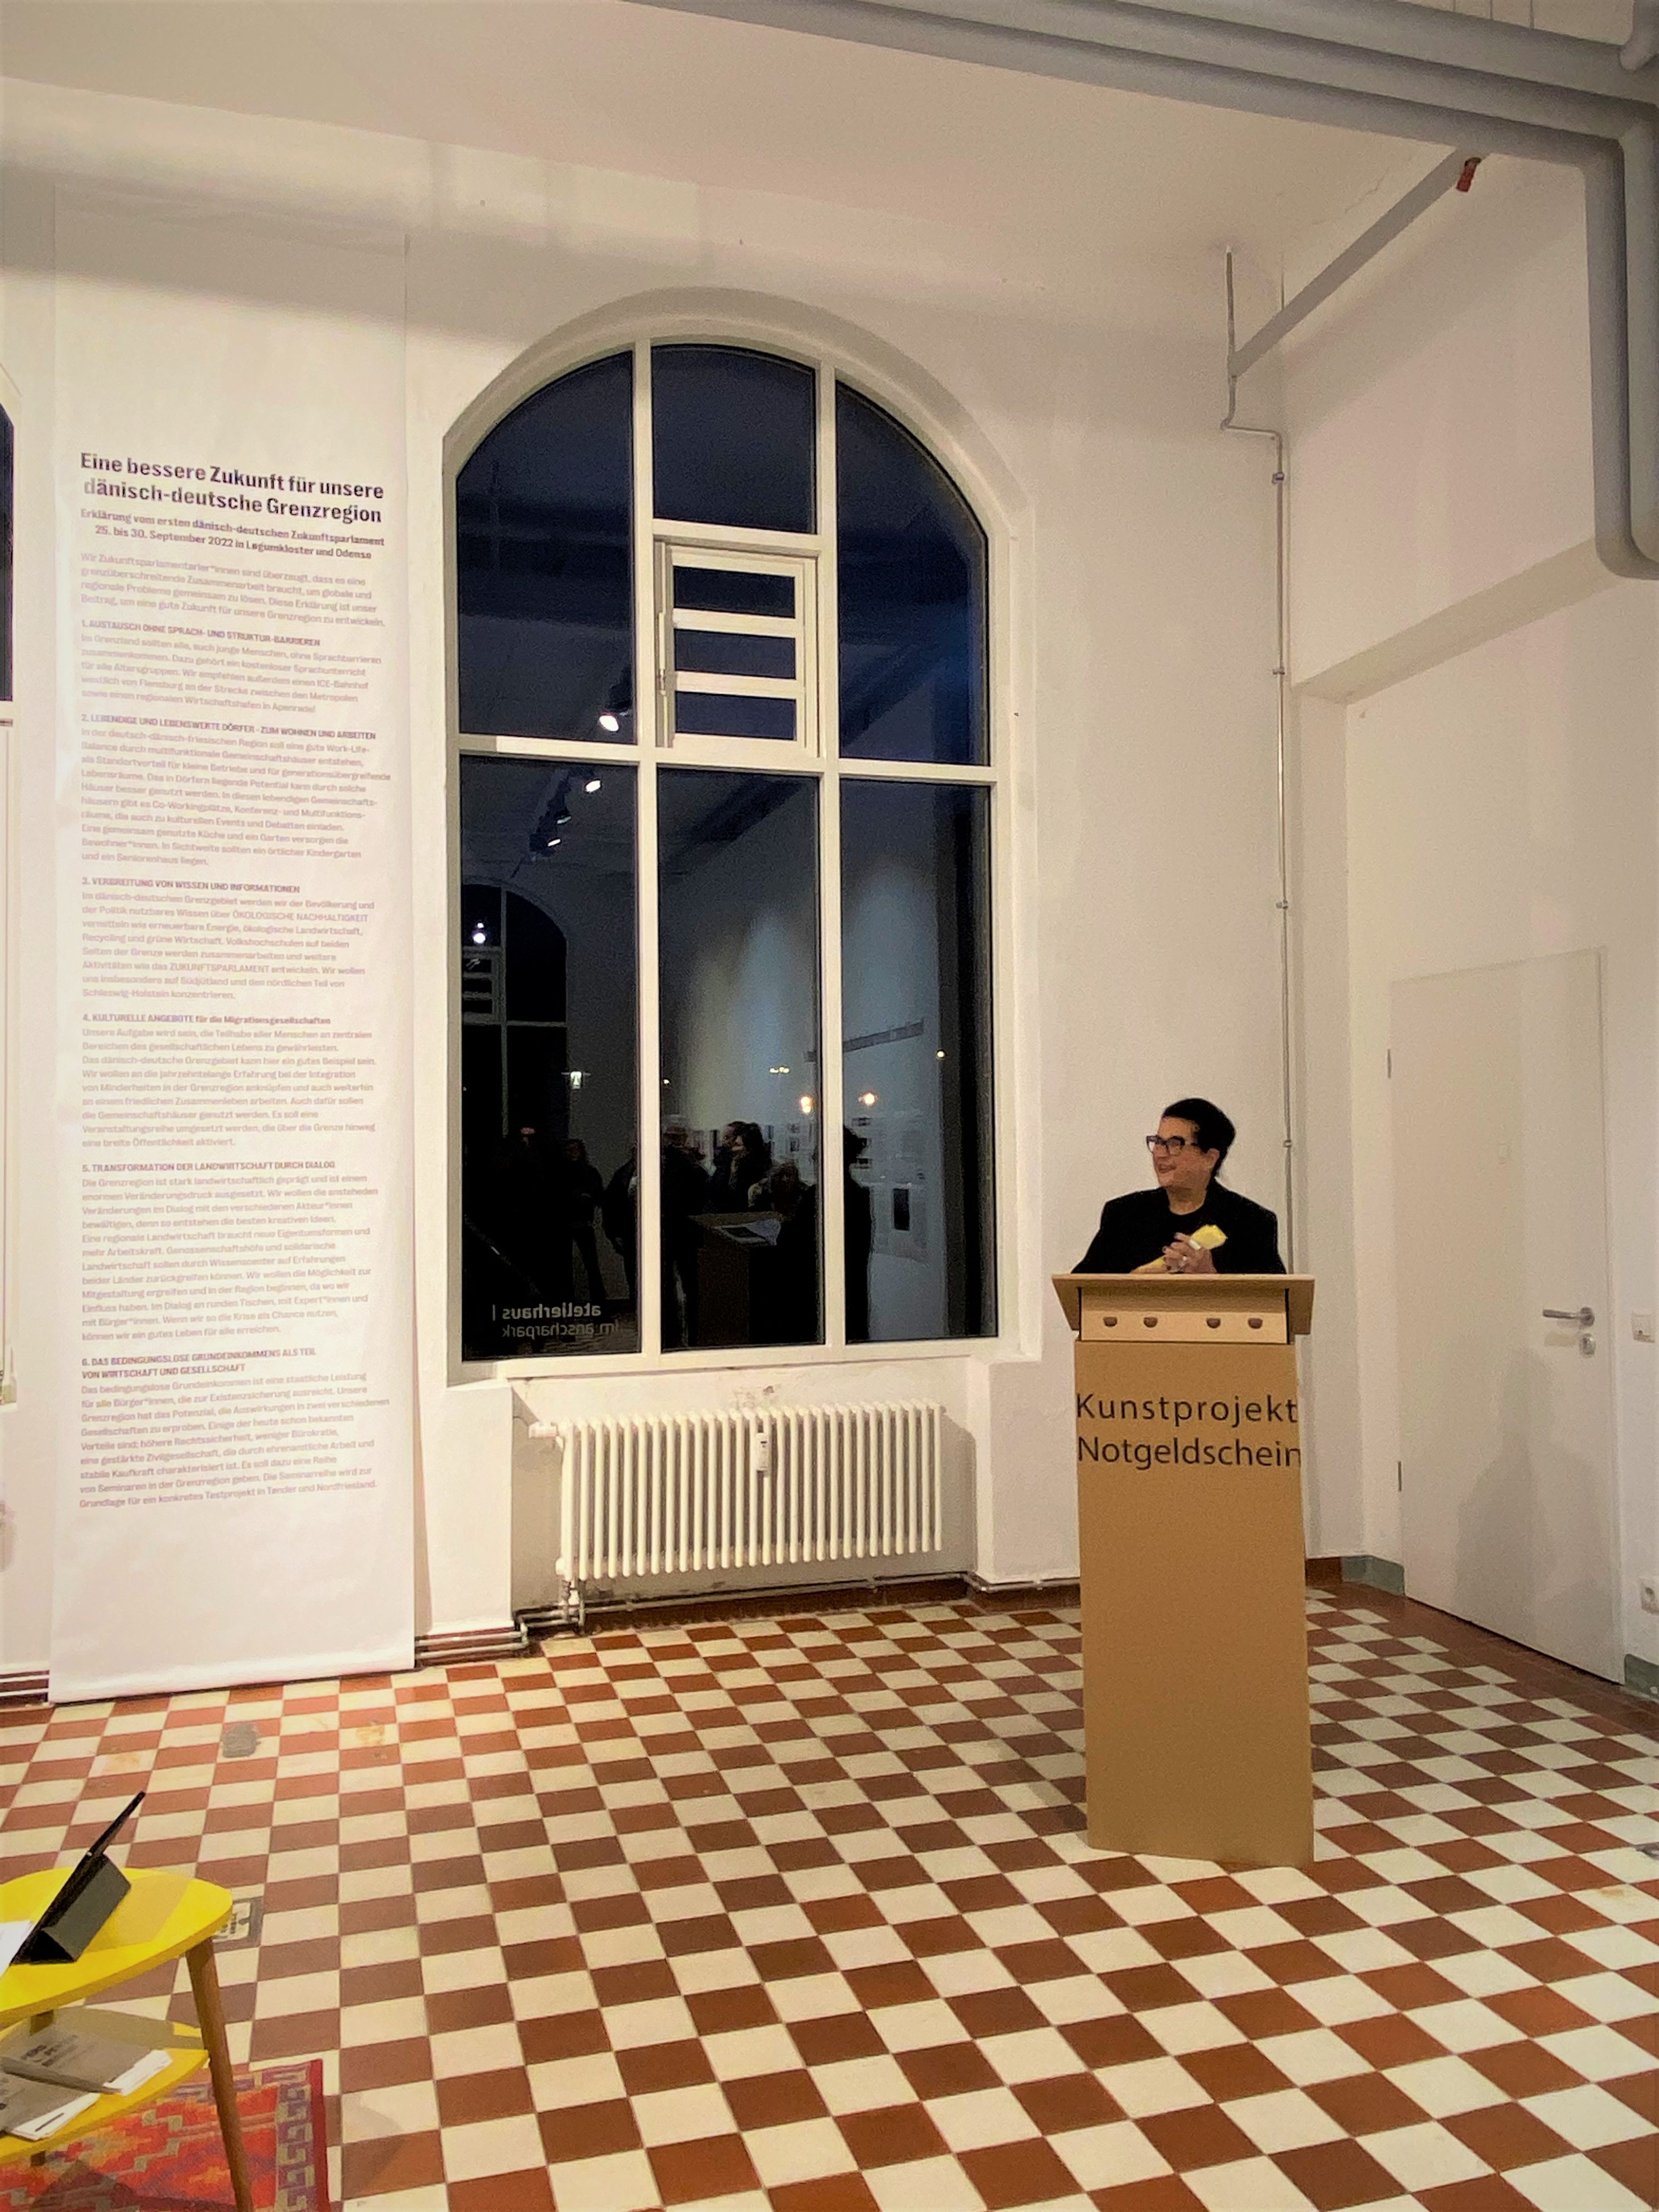 Heike Sockhaus opening the exhibition